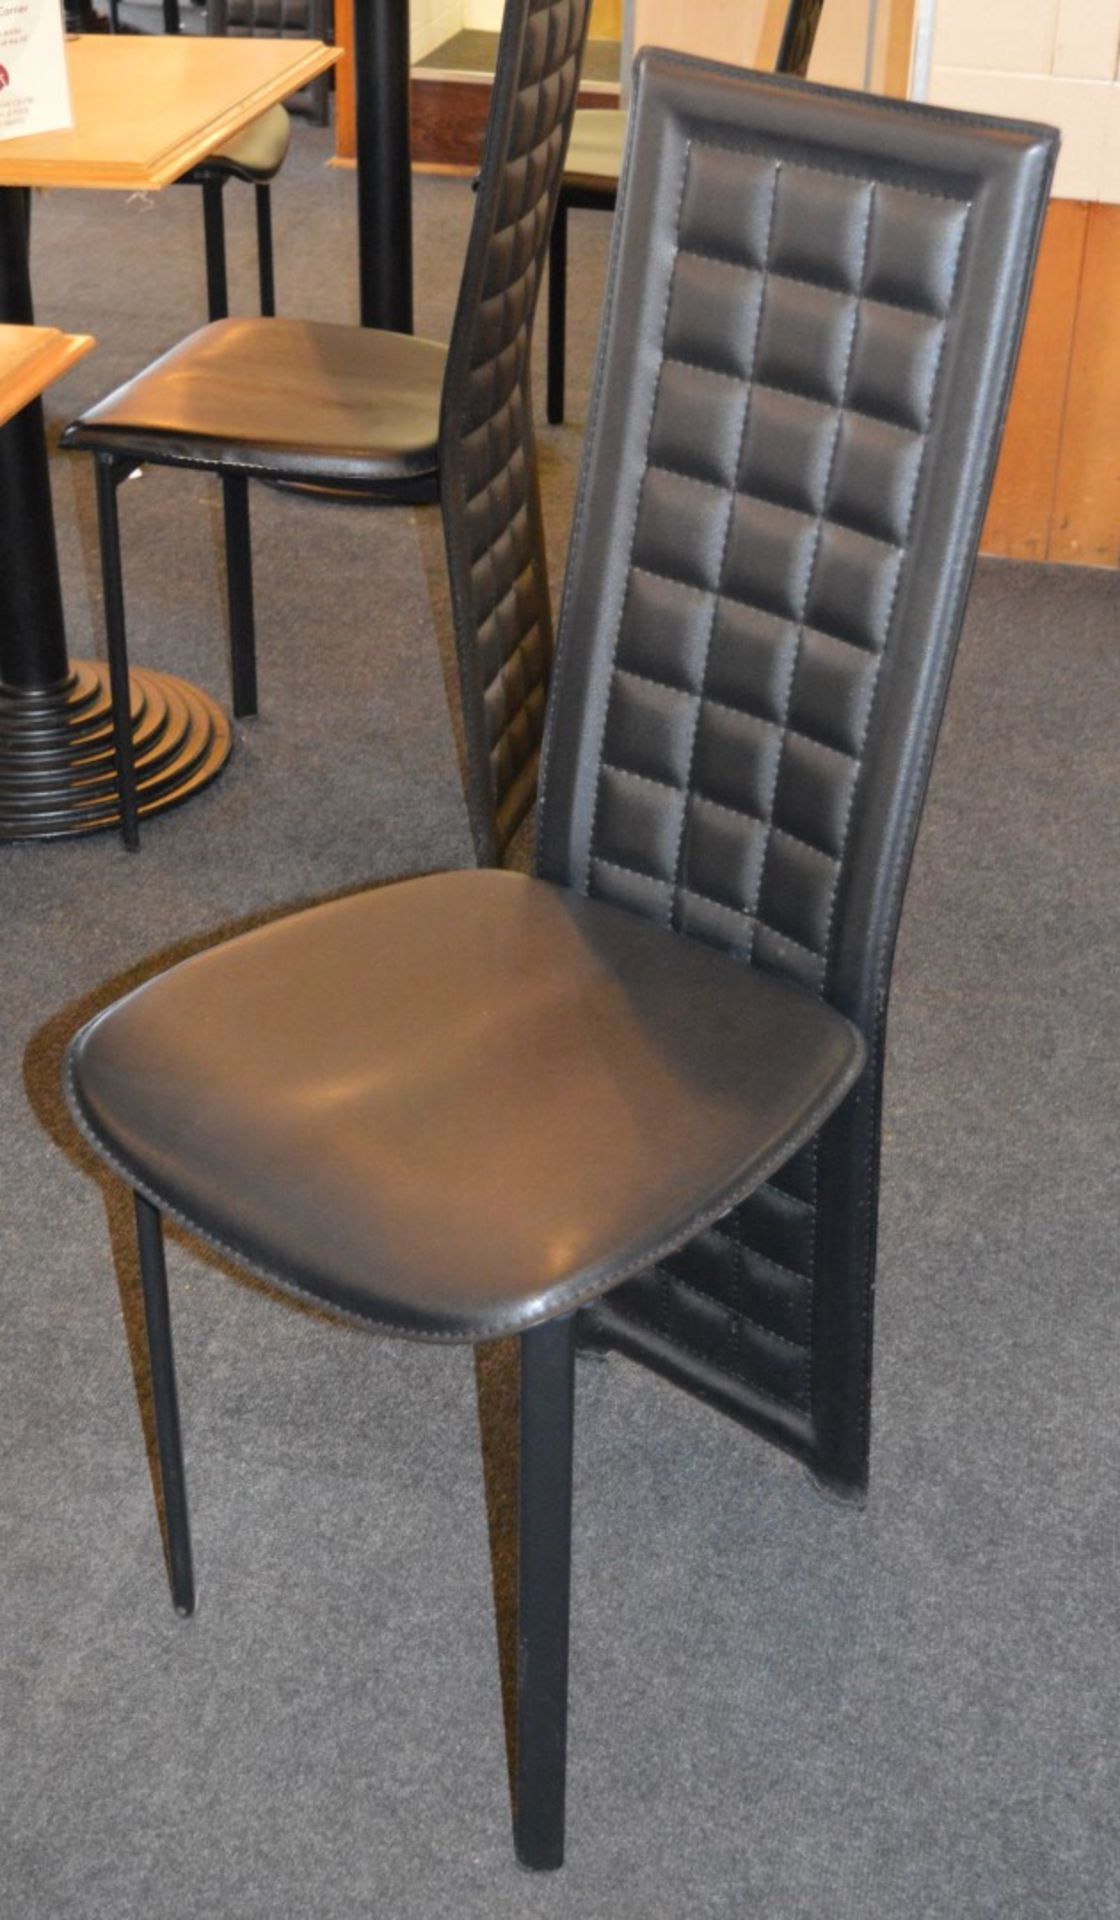 12 x High Back Dining Chairs - Faux Cushioned Leather in Black - H100 x W43 x D50 cms - Used